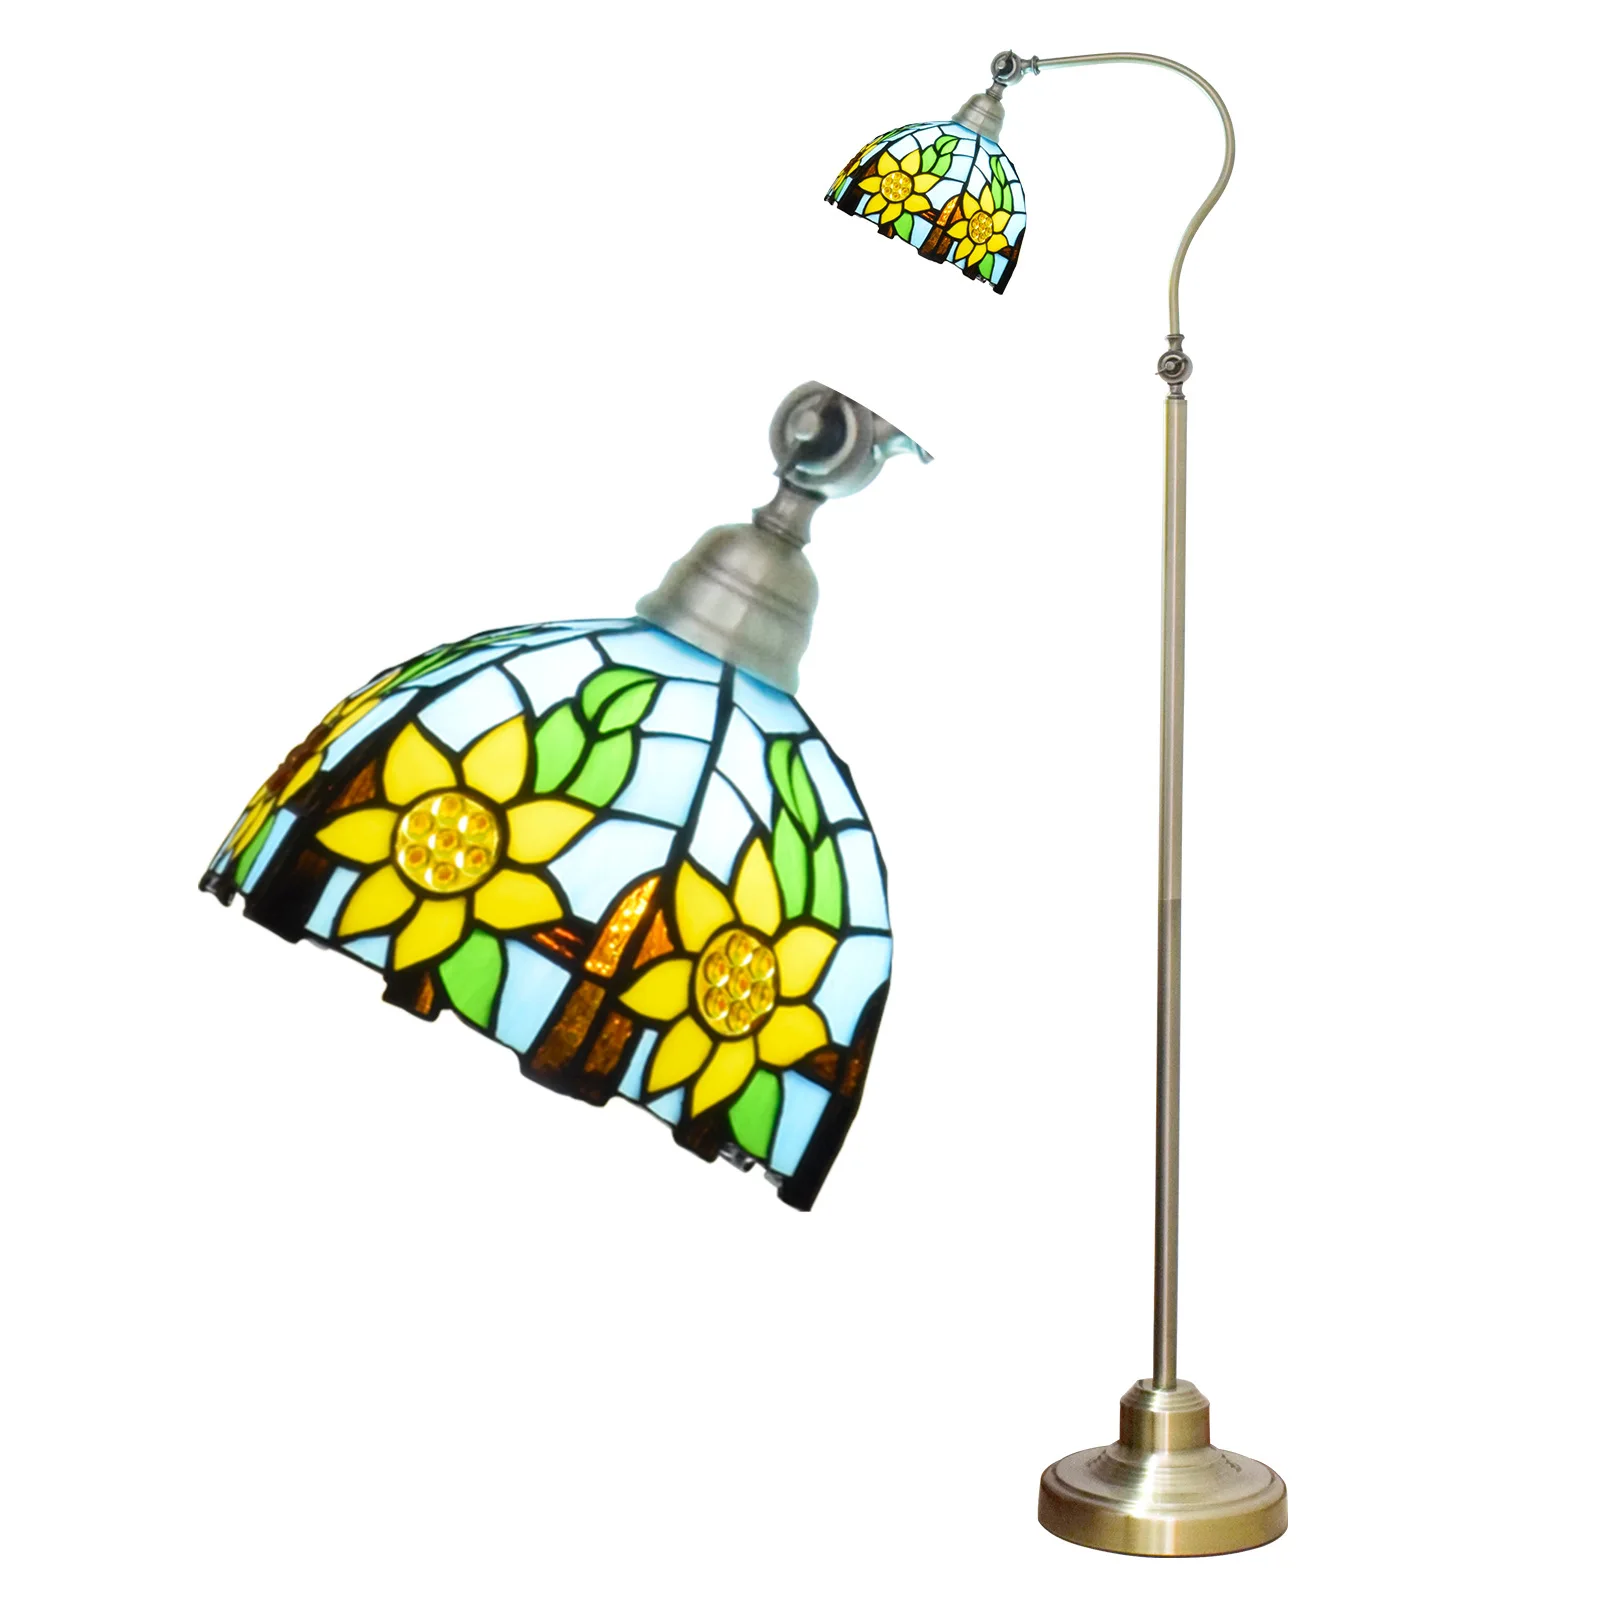 

Tiffany Stained Glass Floor Lamp Decor Bedroom Living Room Home Rural Sunflower Arch Lamp Adjustable Standing Reading Lamp